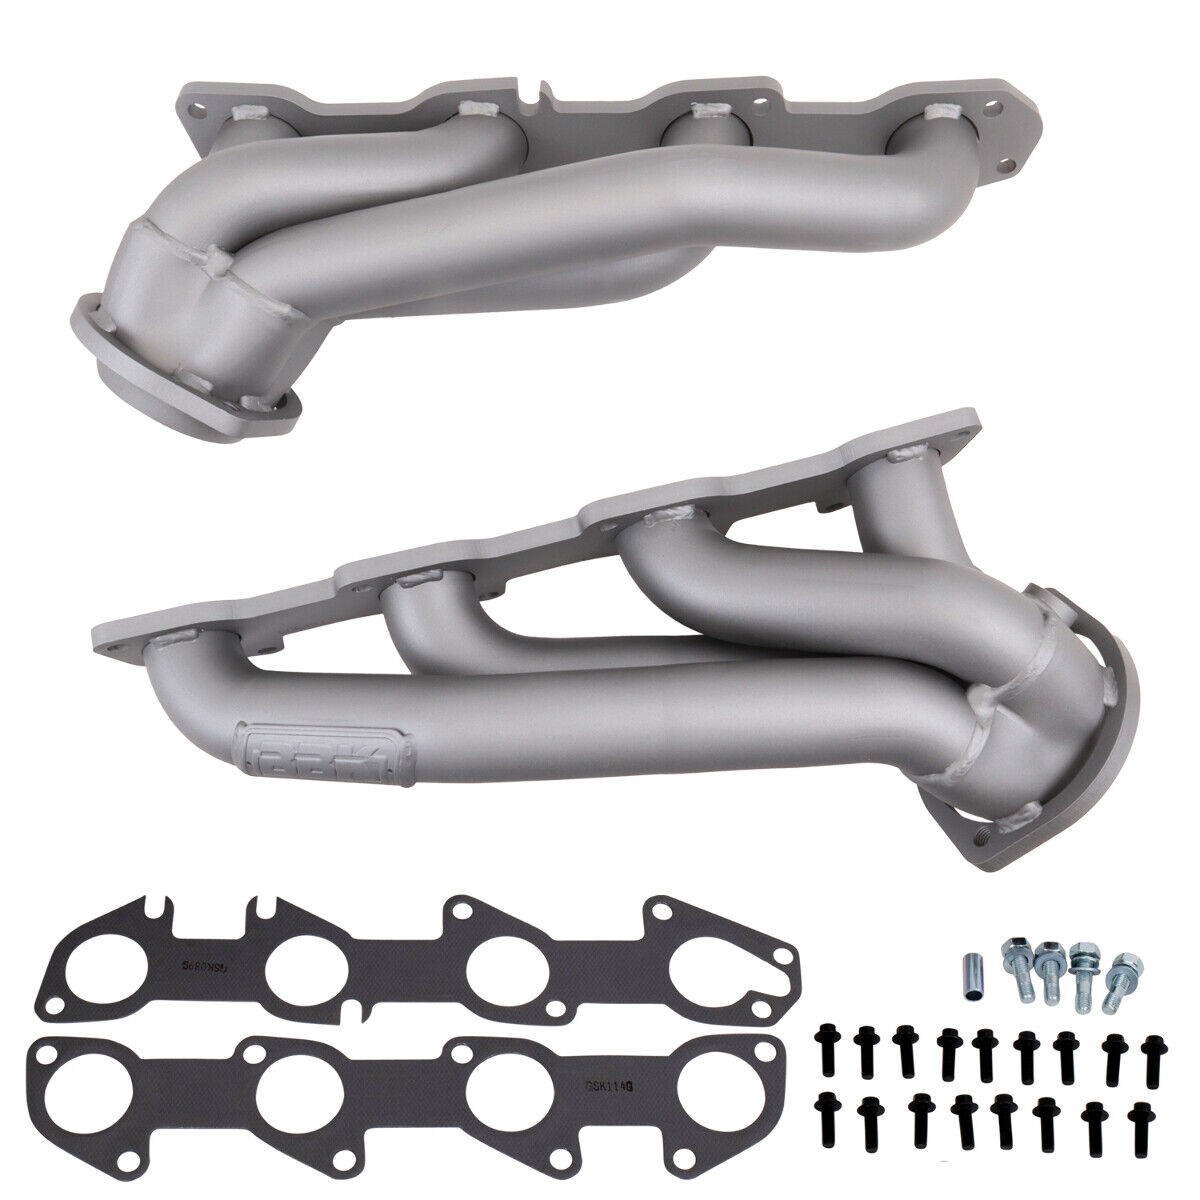 Fits 2005-2008 Dodge Charger 5.7L 300C 1-3/4 Shorty Exhaust Headers-4012